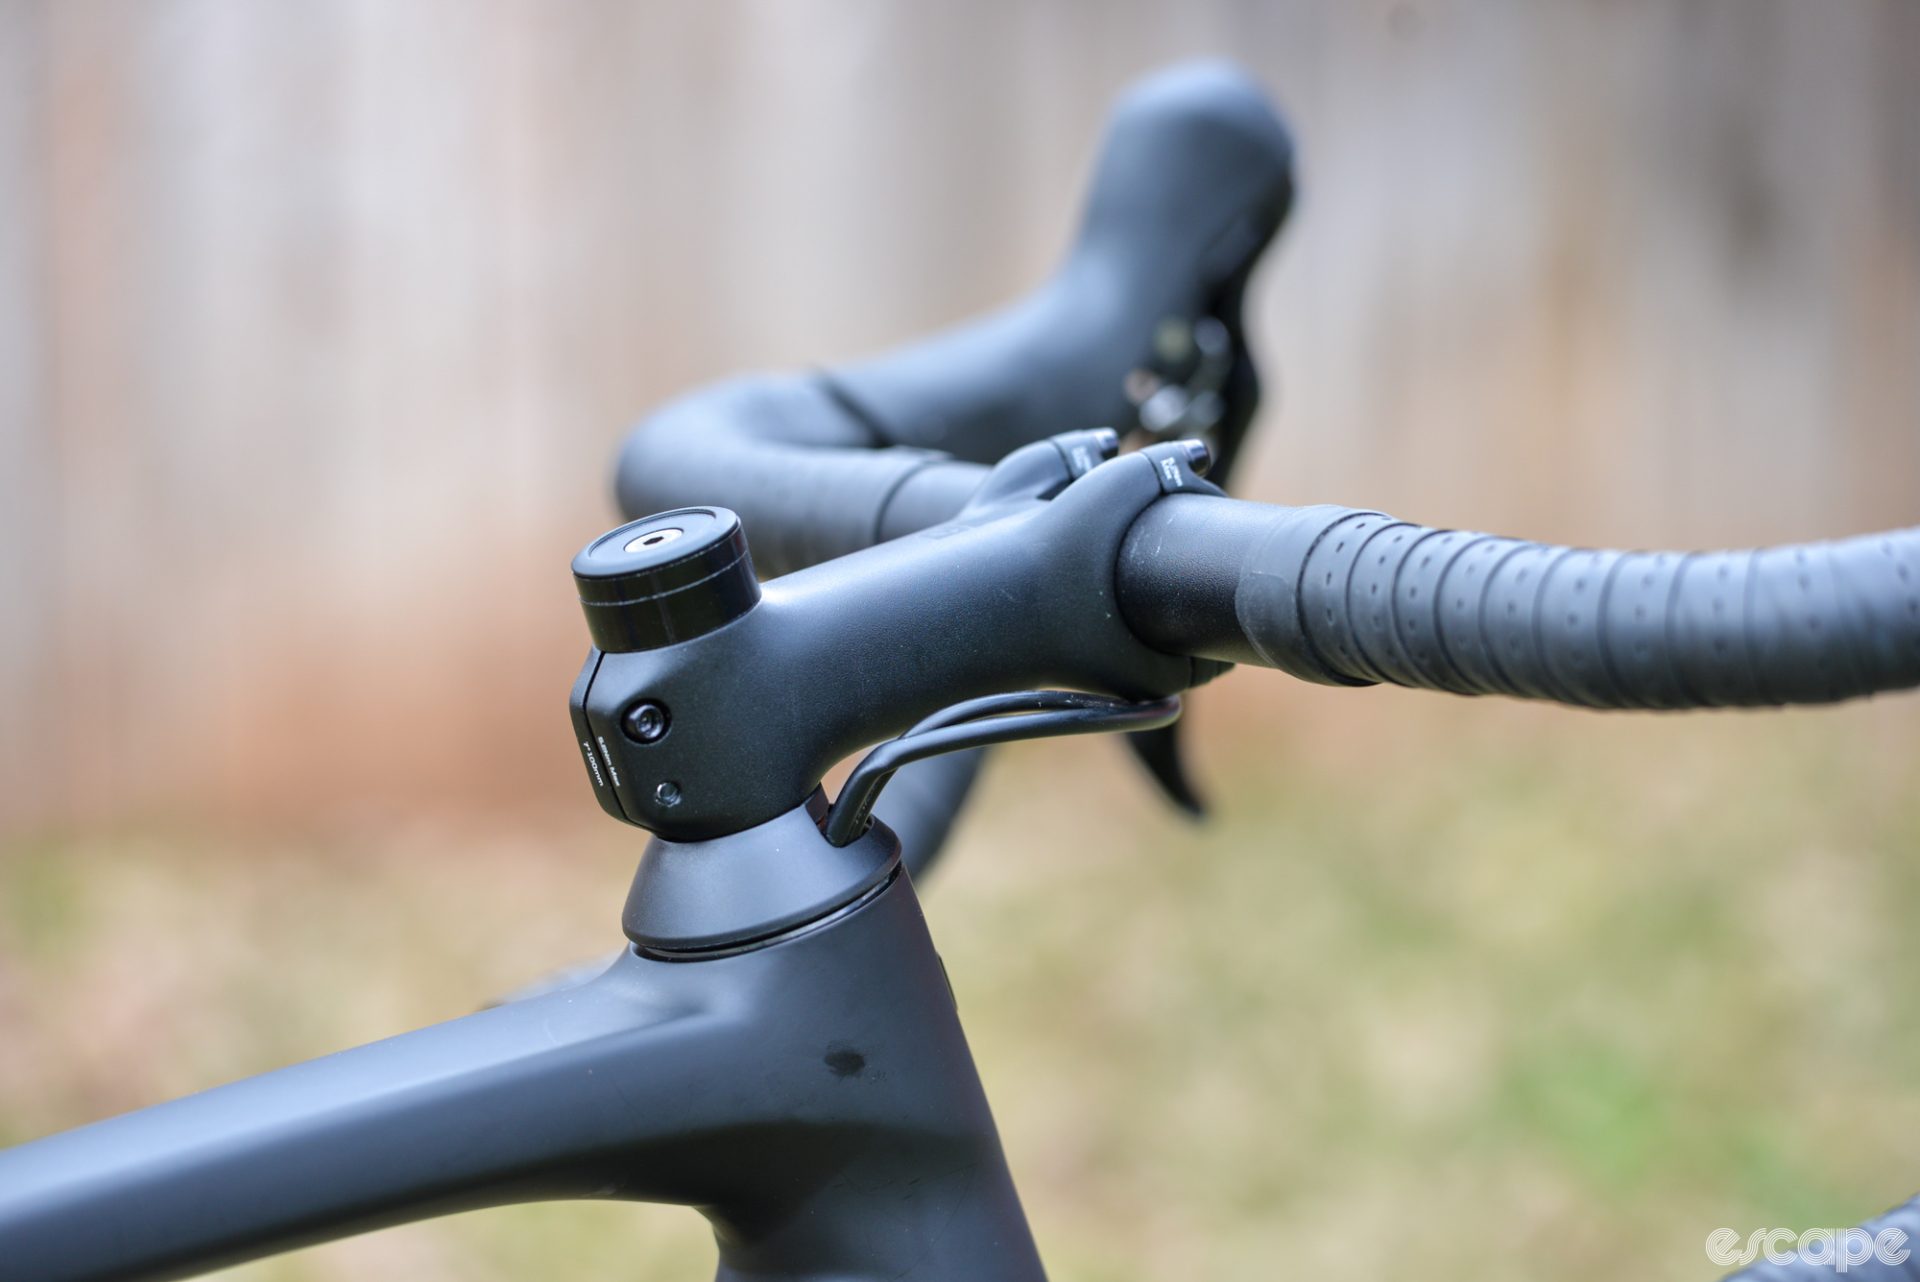 The close-to-internal routing shows a kink in the hydraulic brake line for the rear brake as it enters the headset top cap.